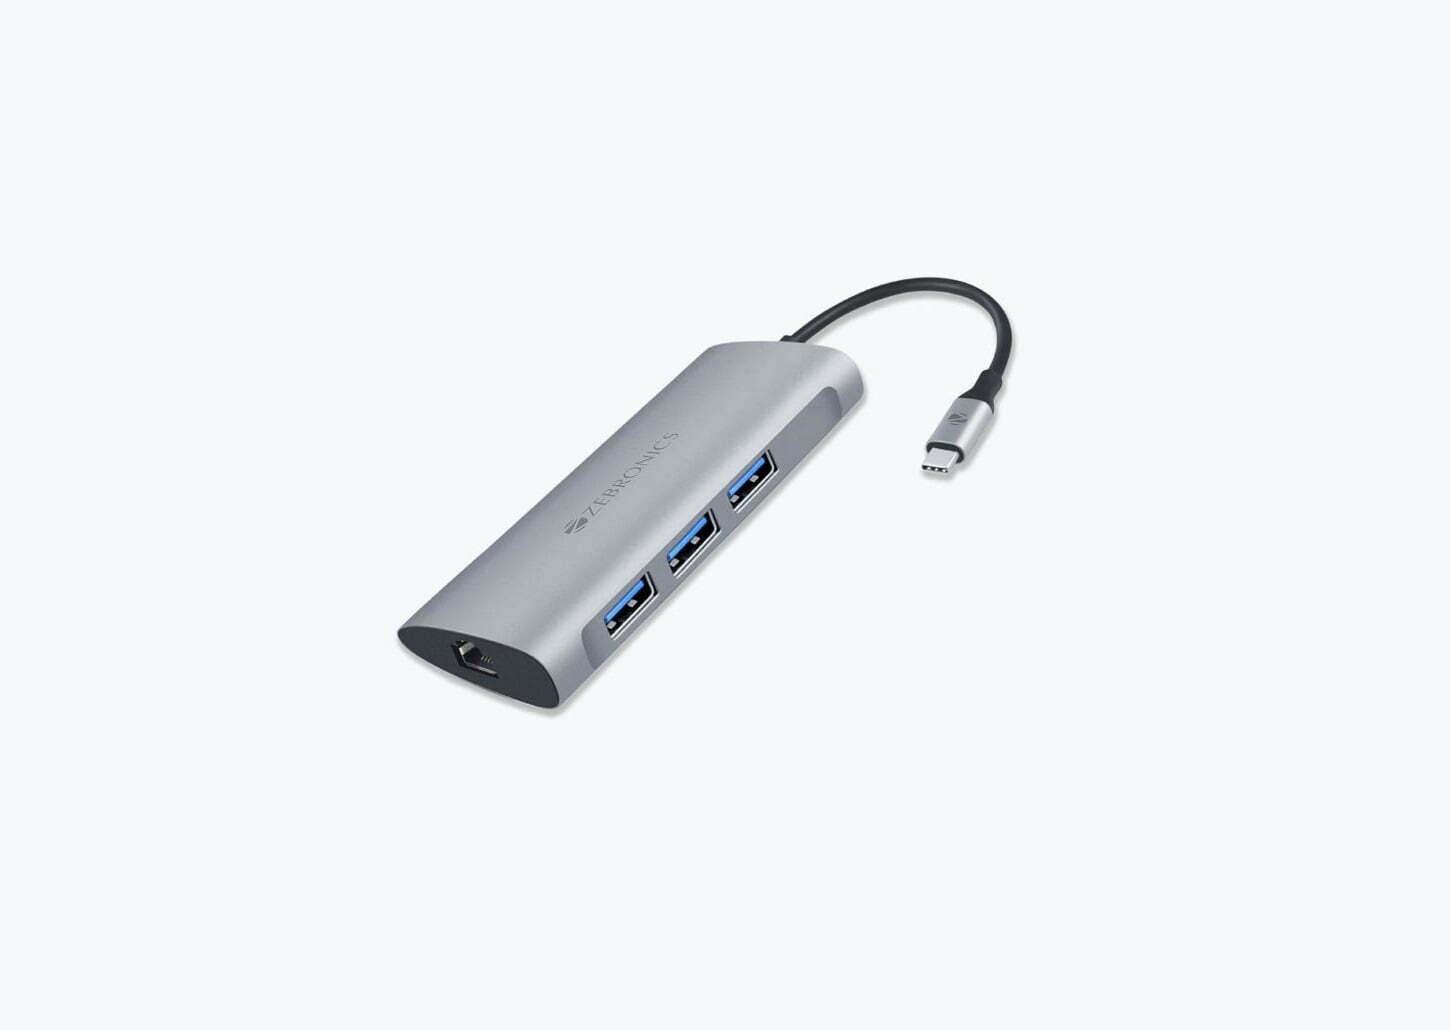 ZEBRONICS ZEB-TA1000UCL 6-in-1 USB Type C Multiport Adapter User Manual - Featured image